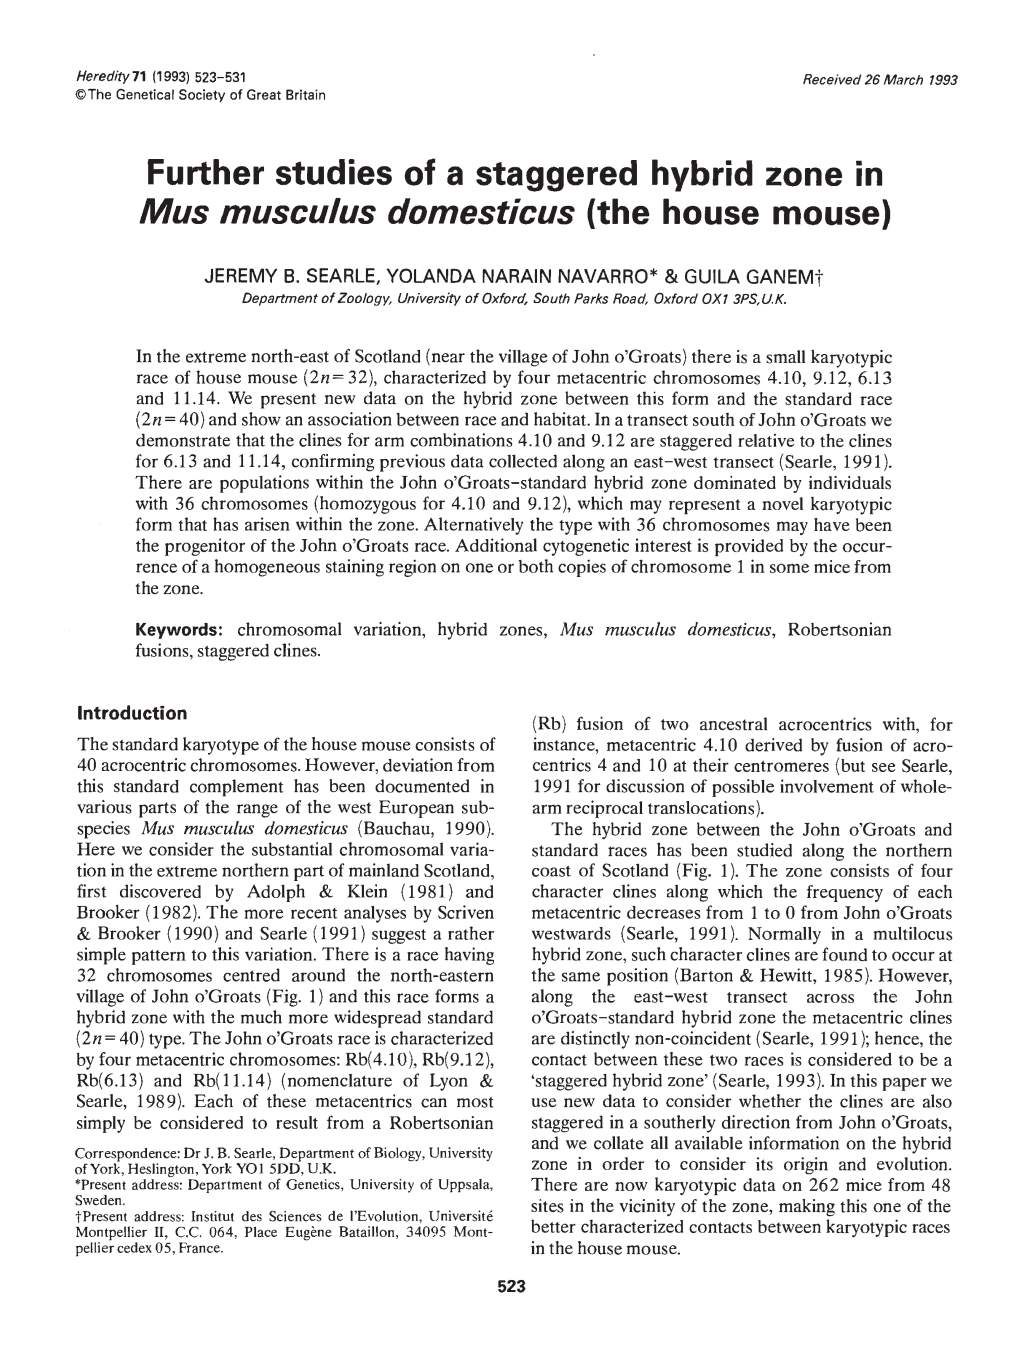 Further Studies of a Staggered Hybrid Zone in Musmusculus Domesticus (The House Mouse)